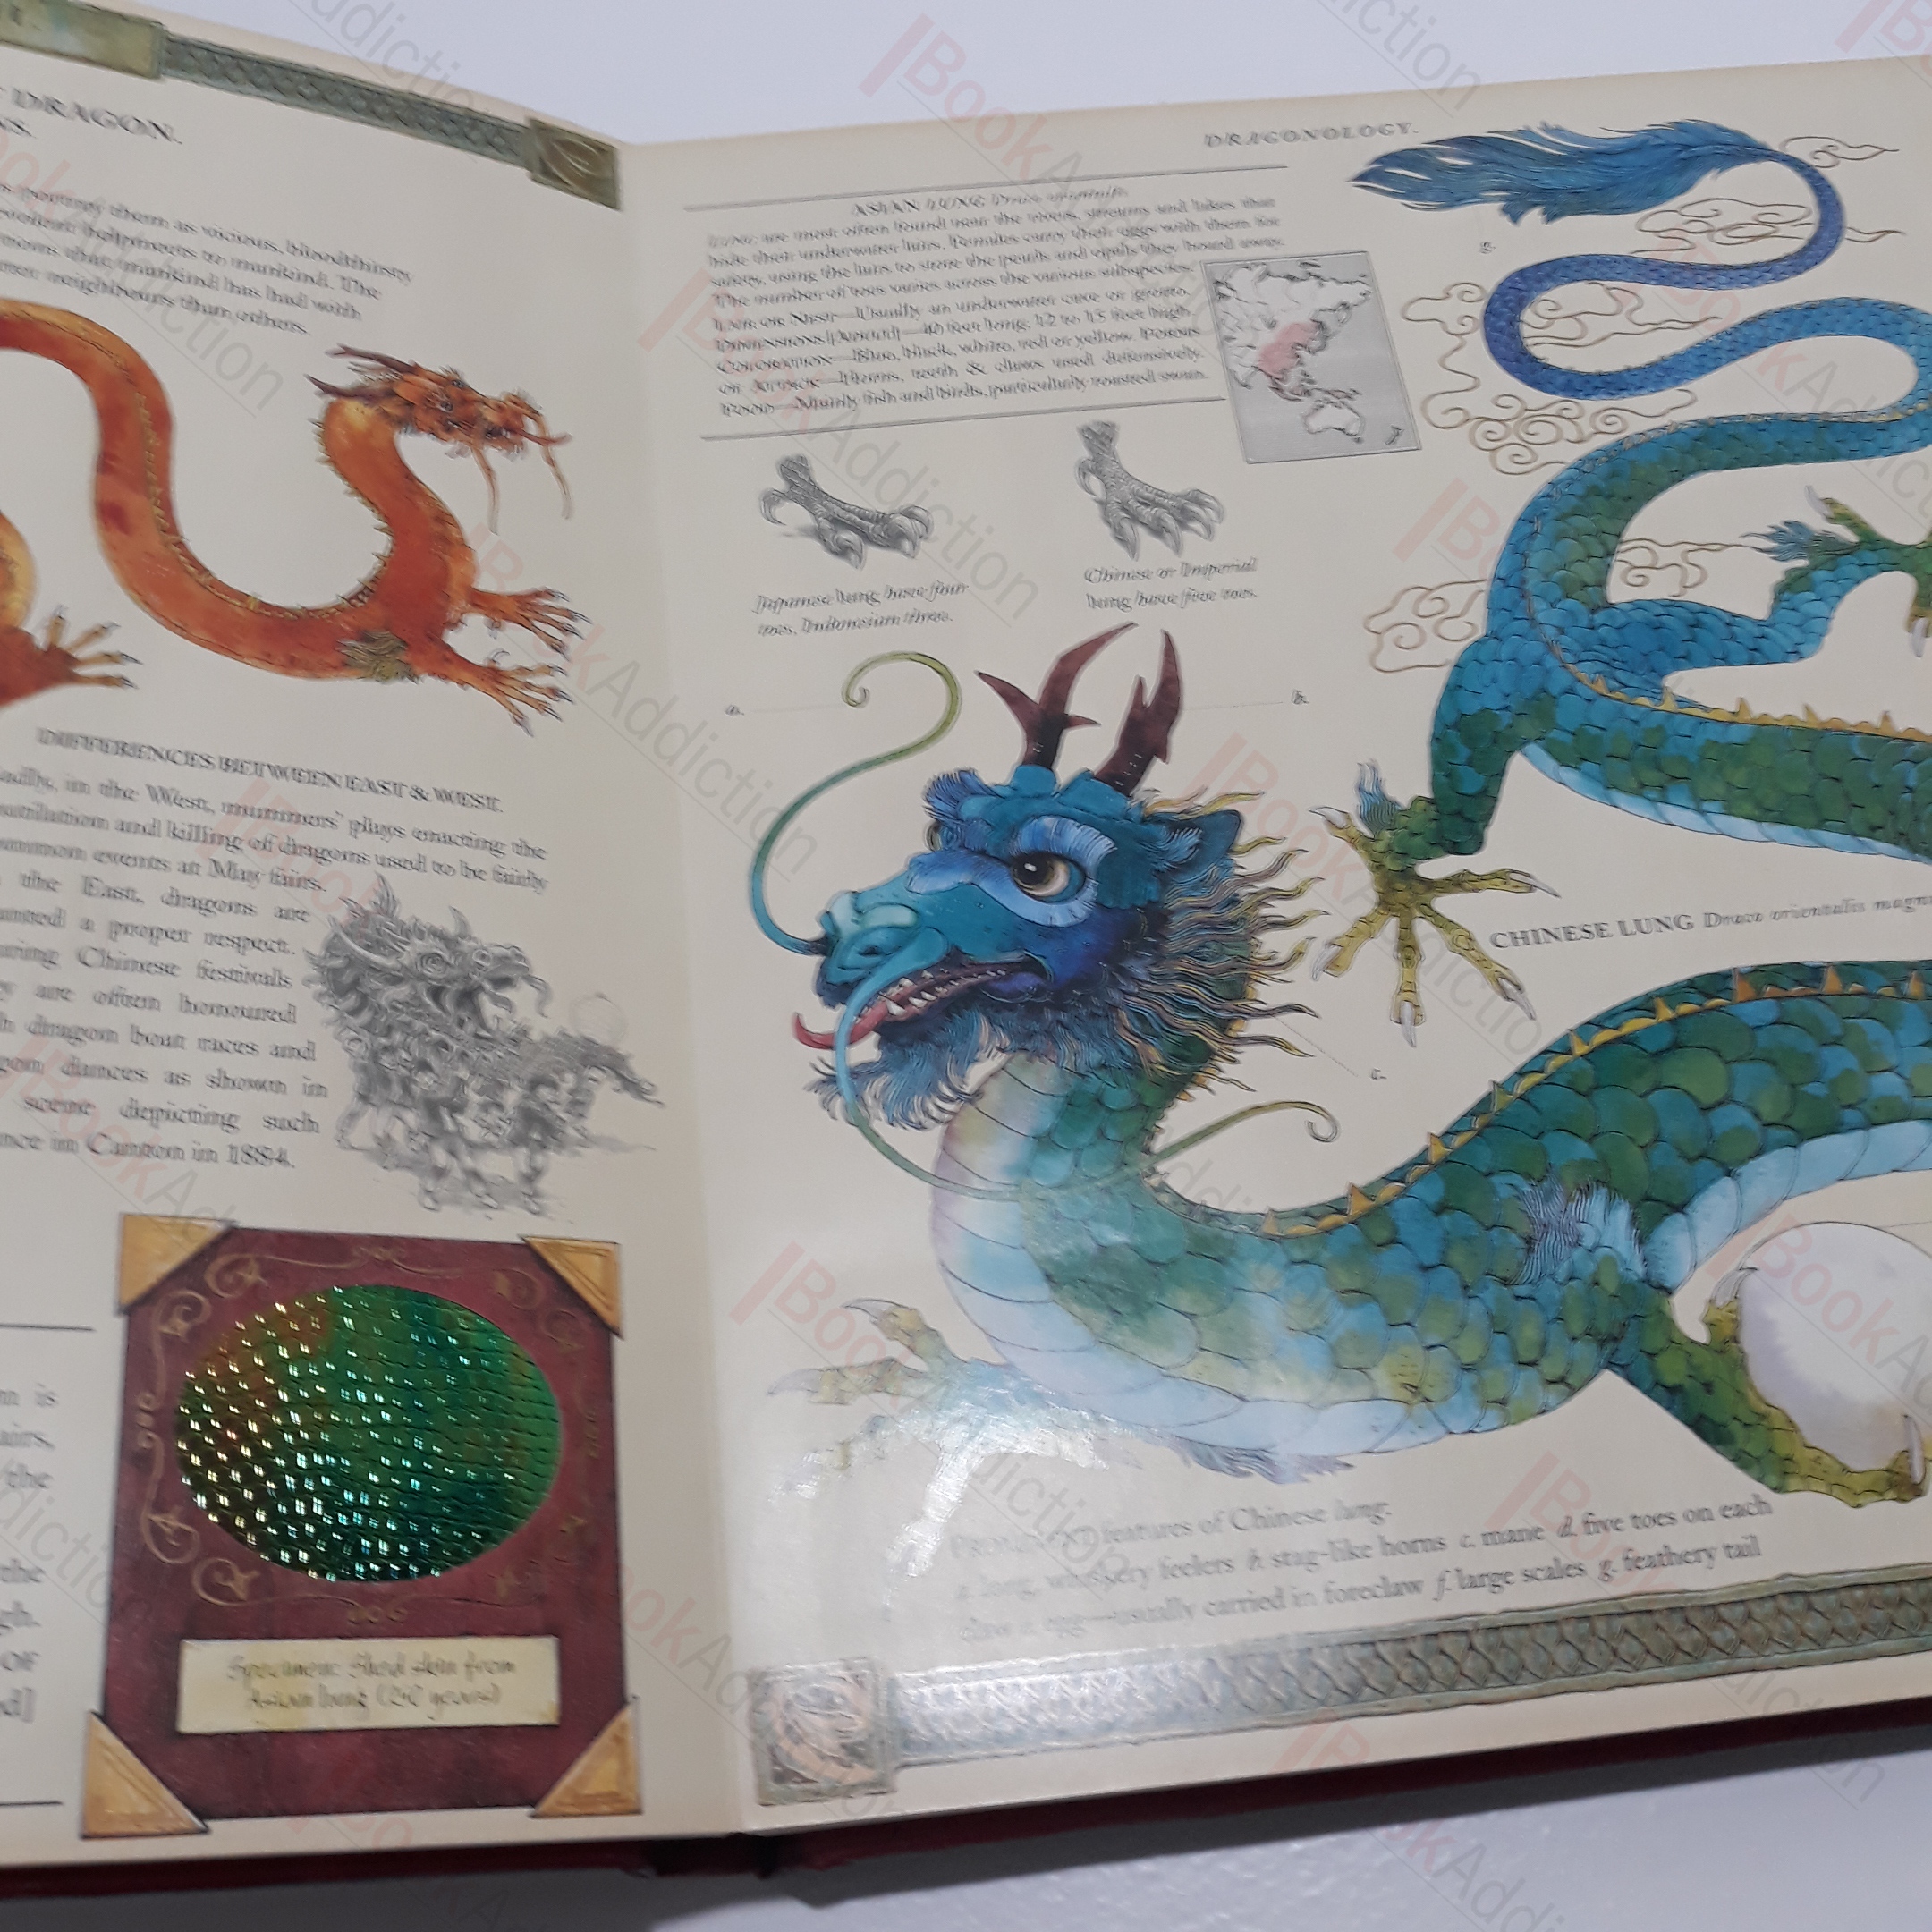 Dr Ernest Drake S Dragonology The Complete Book Of Dragons By Steer Dugald A Editor Very Good Hardcover 03 Bookaddiction Ibooknet Member